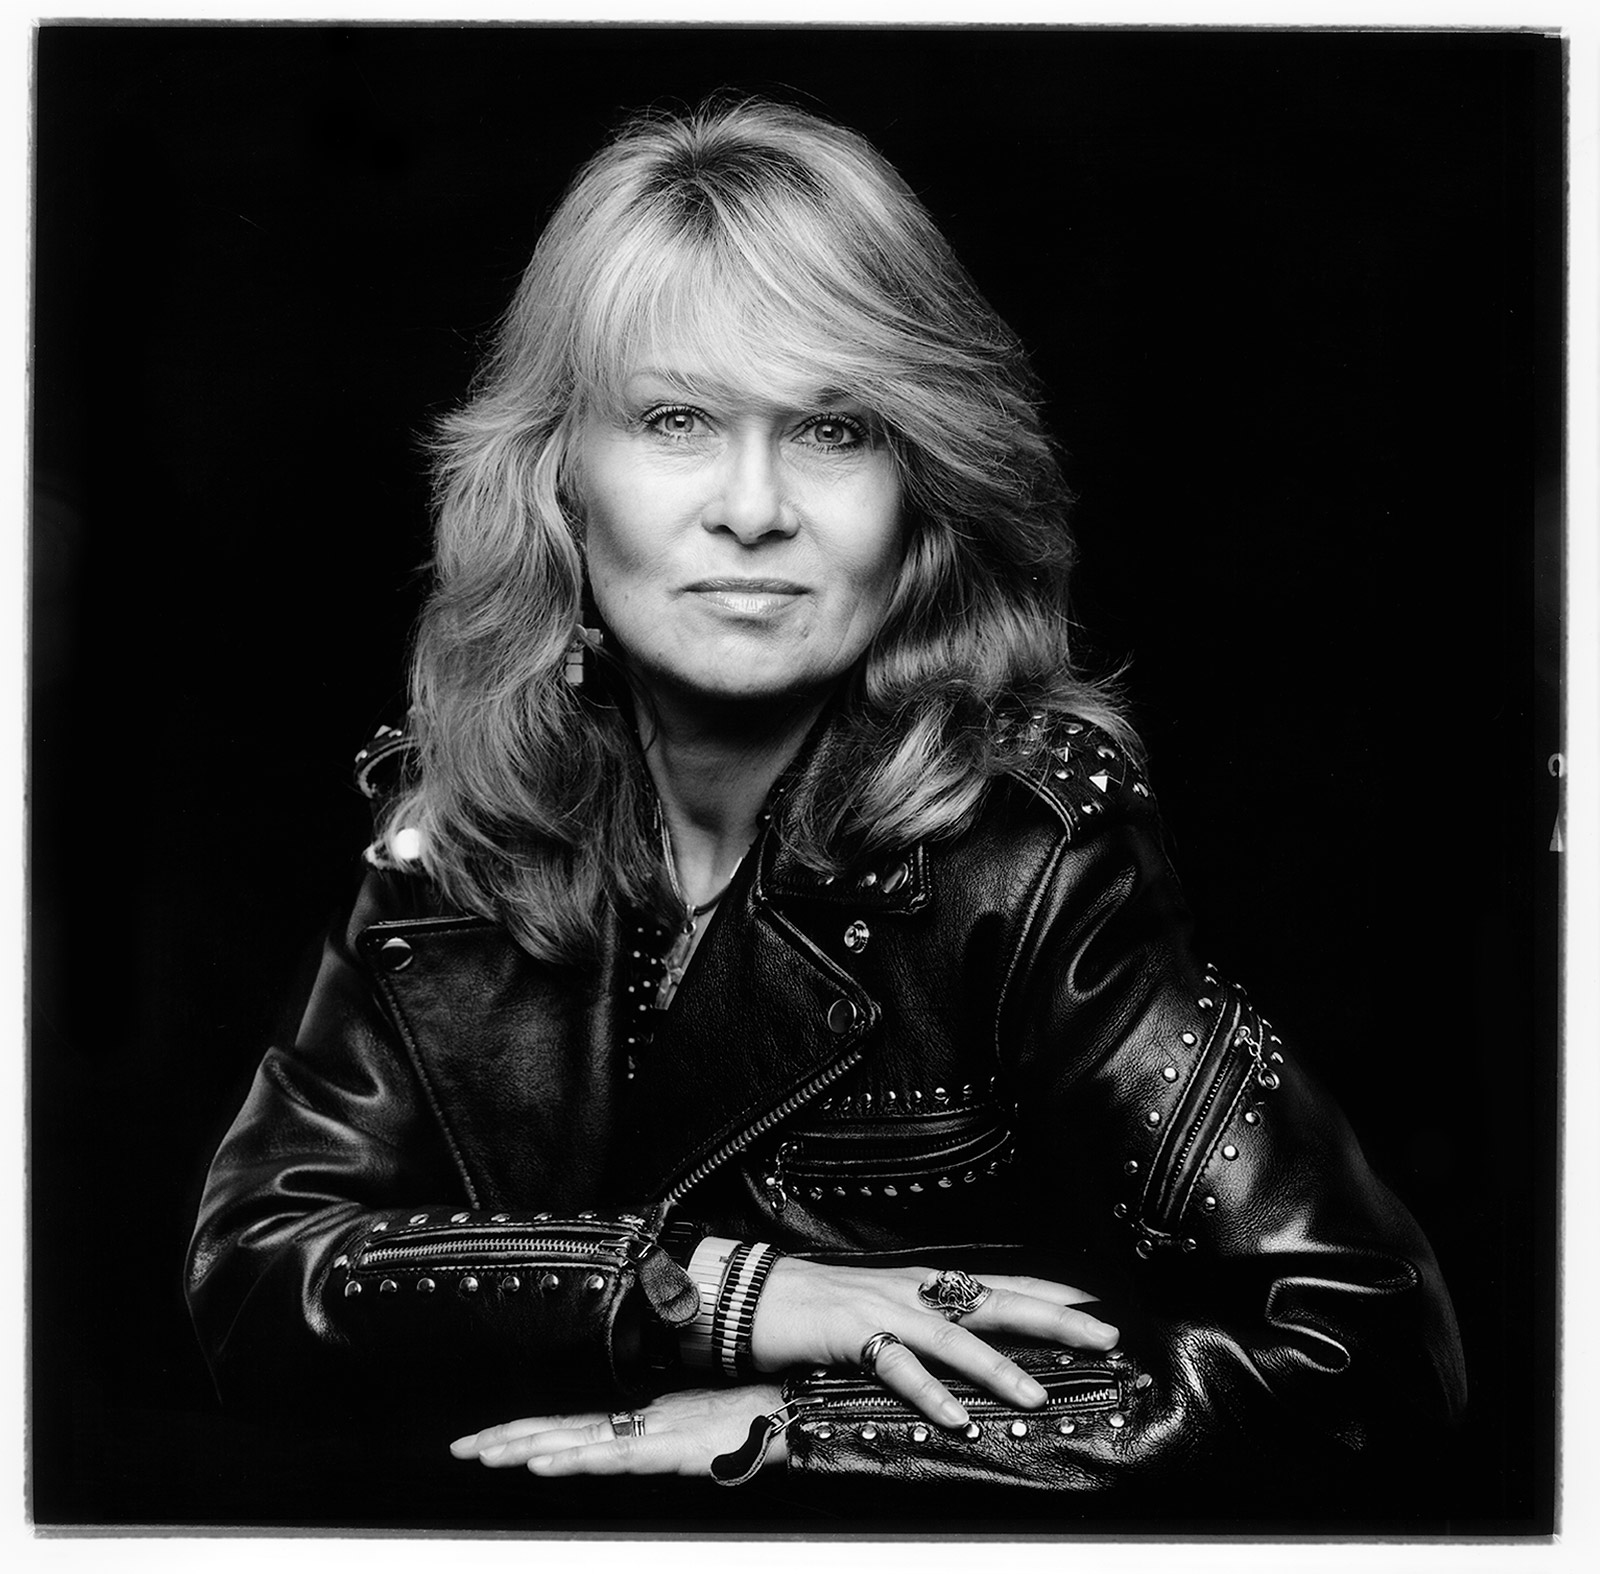 A black and white portrait of a woman. She wears a studded leather jacket, which gives off a rock-and-roll style. Her hair is long and in light in color, cascading over her shoulders. Her hands rest on a table, adorned with bracelets and rings, enhancing the style of her outfit. The background is completely black, accentuating the subject.